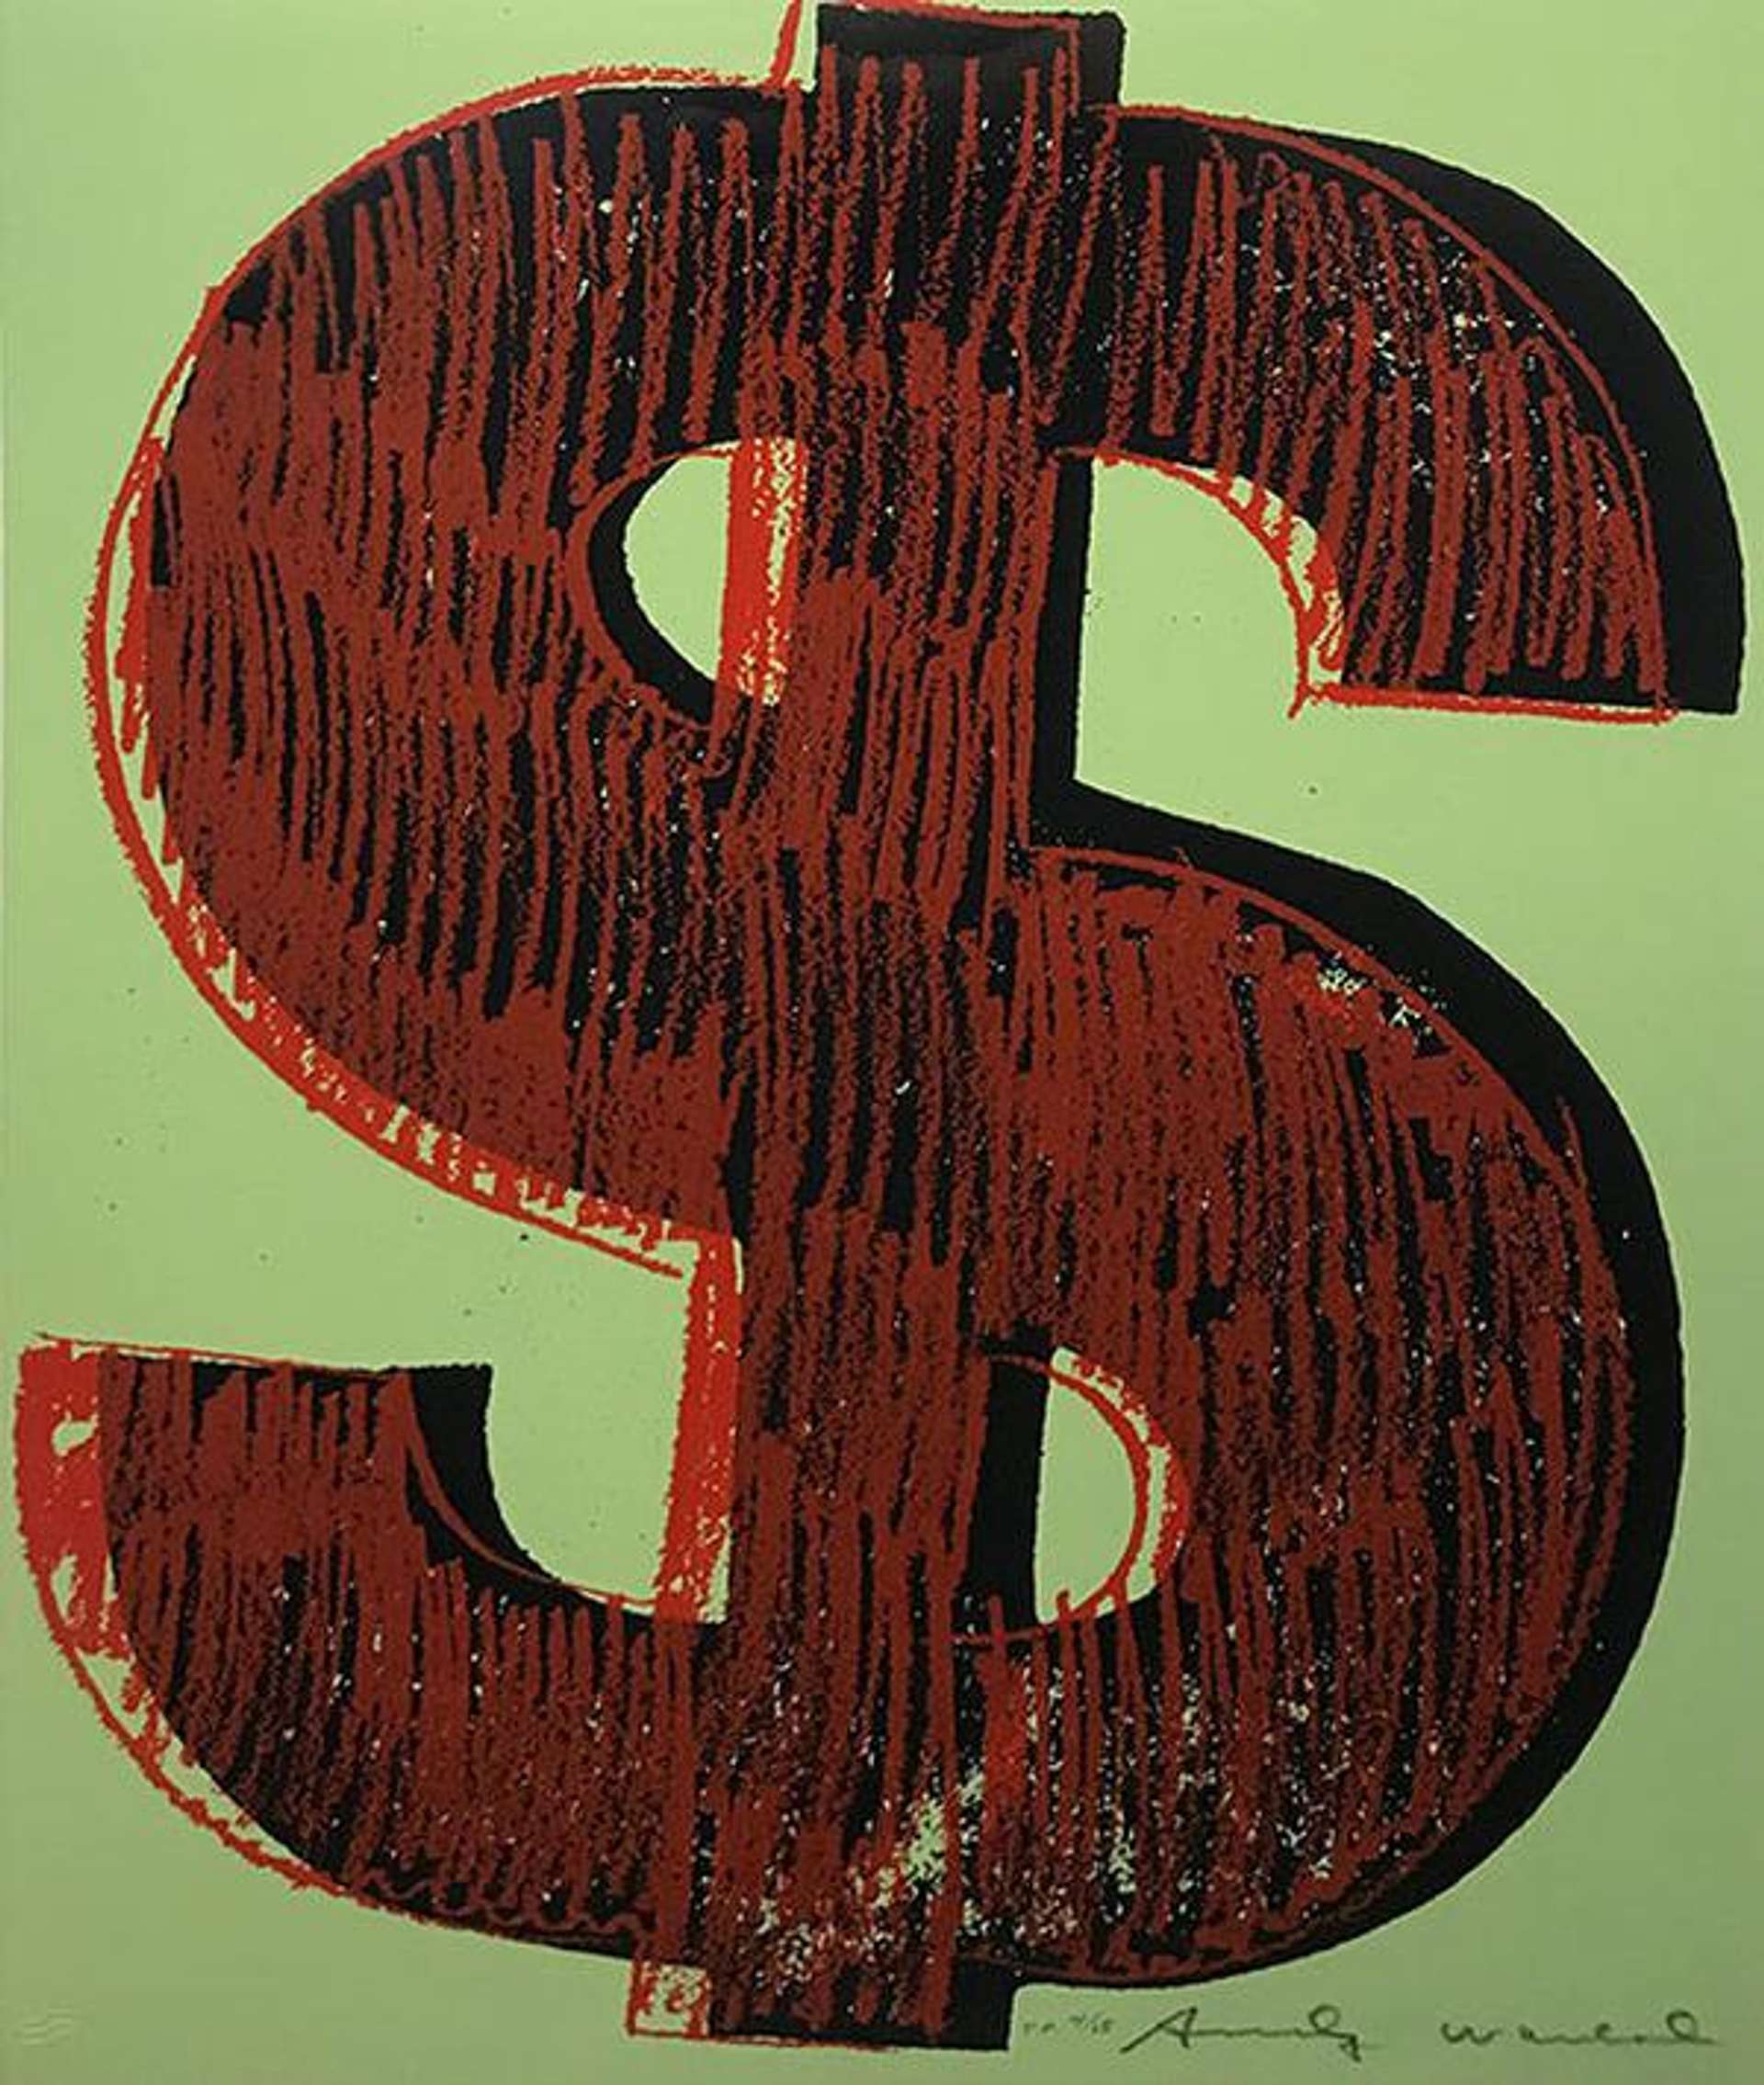 A scribbled red and black pop art dollar sign on a green background